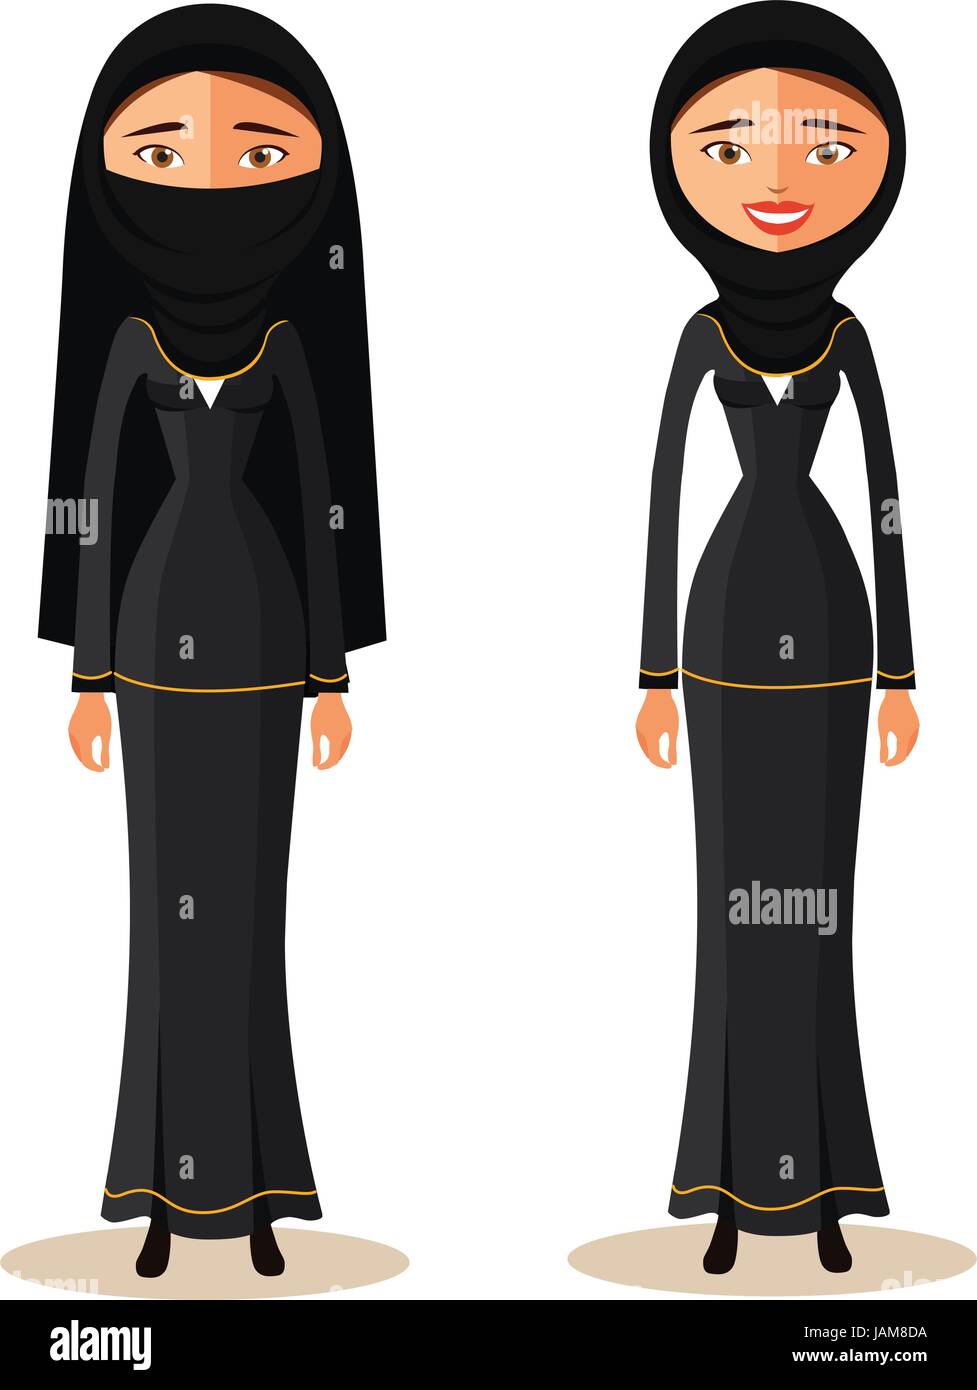 muslim arab woman in a hijab. Arab people character flat cartoon vector illustration. Eps10. Isolated on a white background. Stock Vector